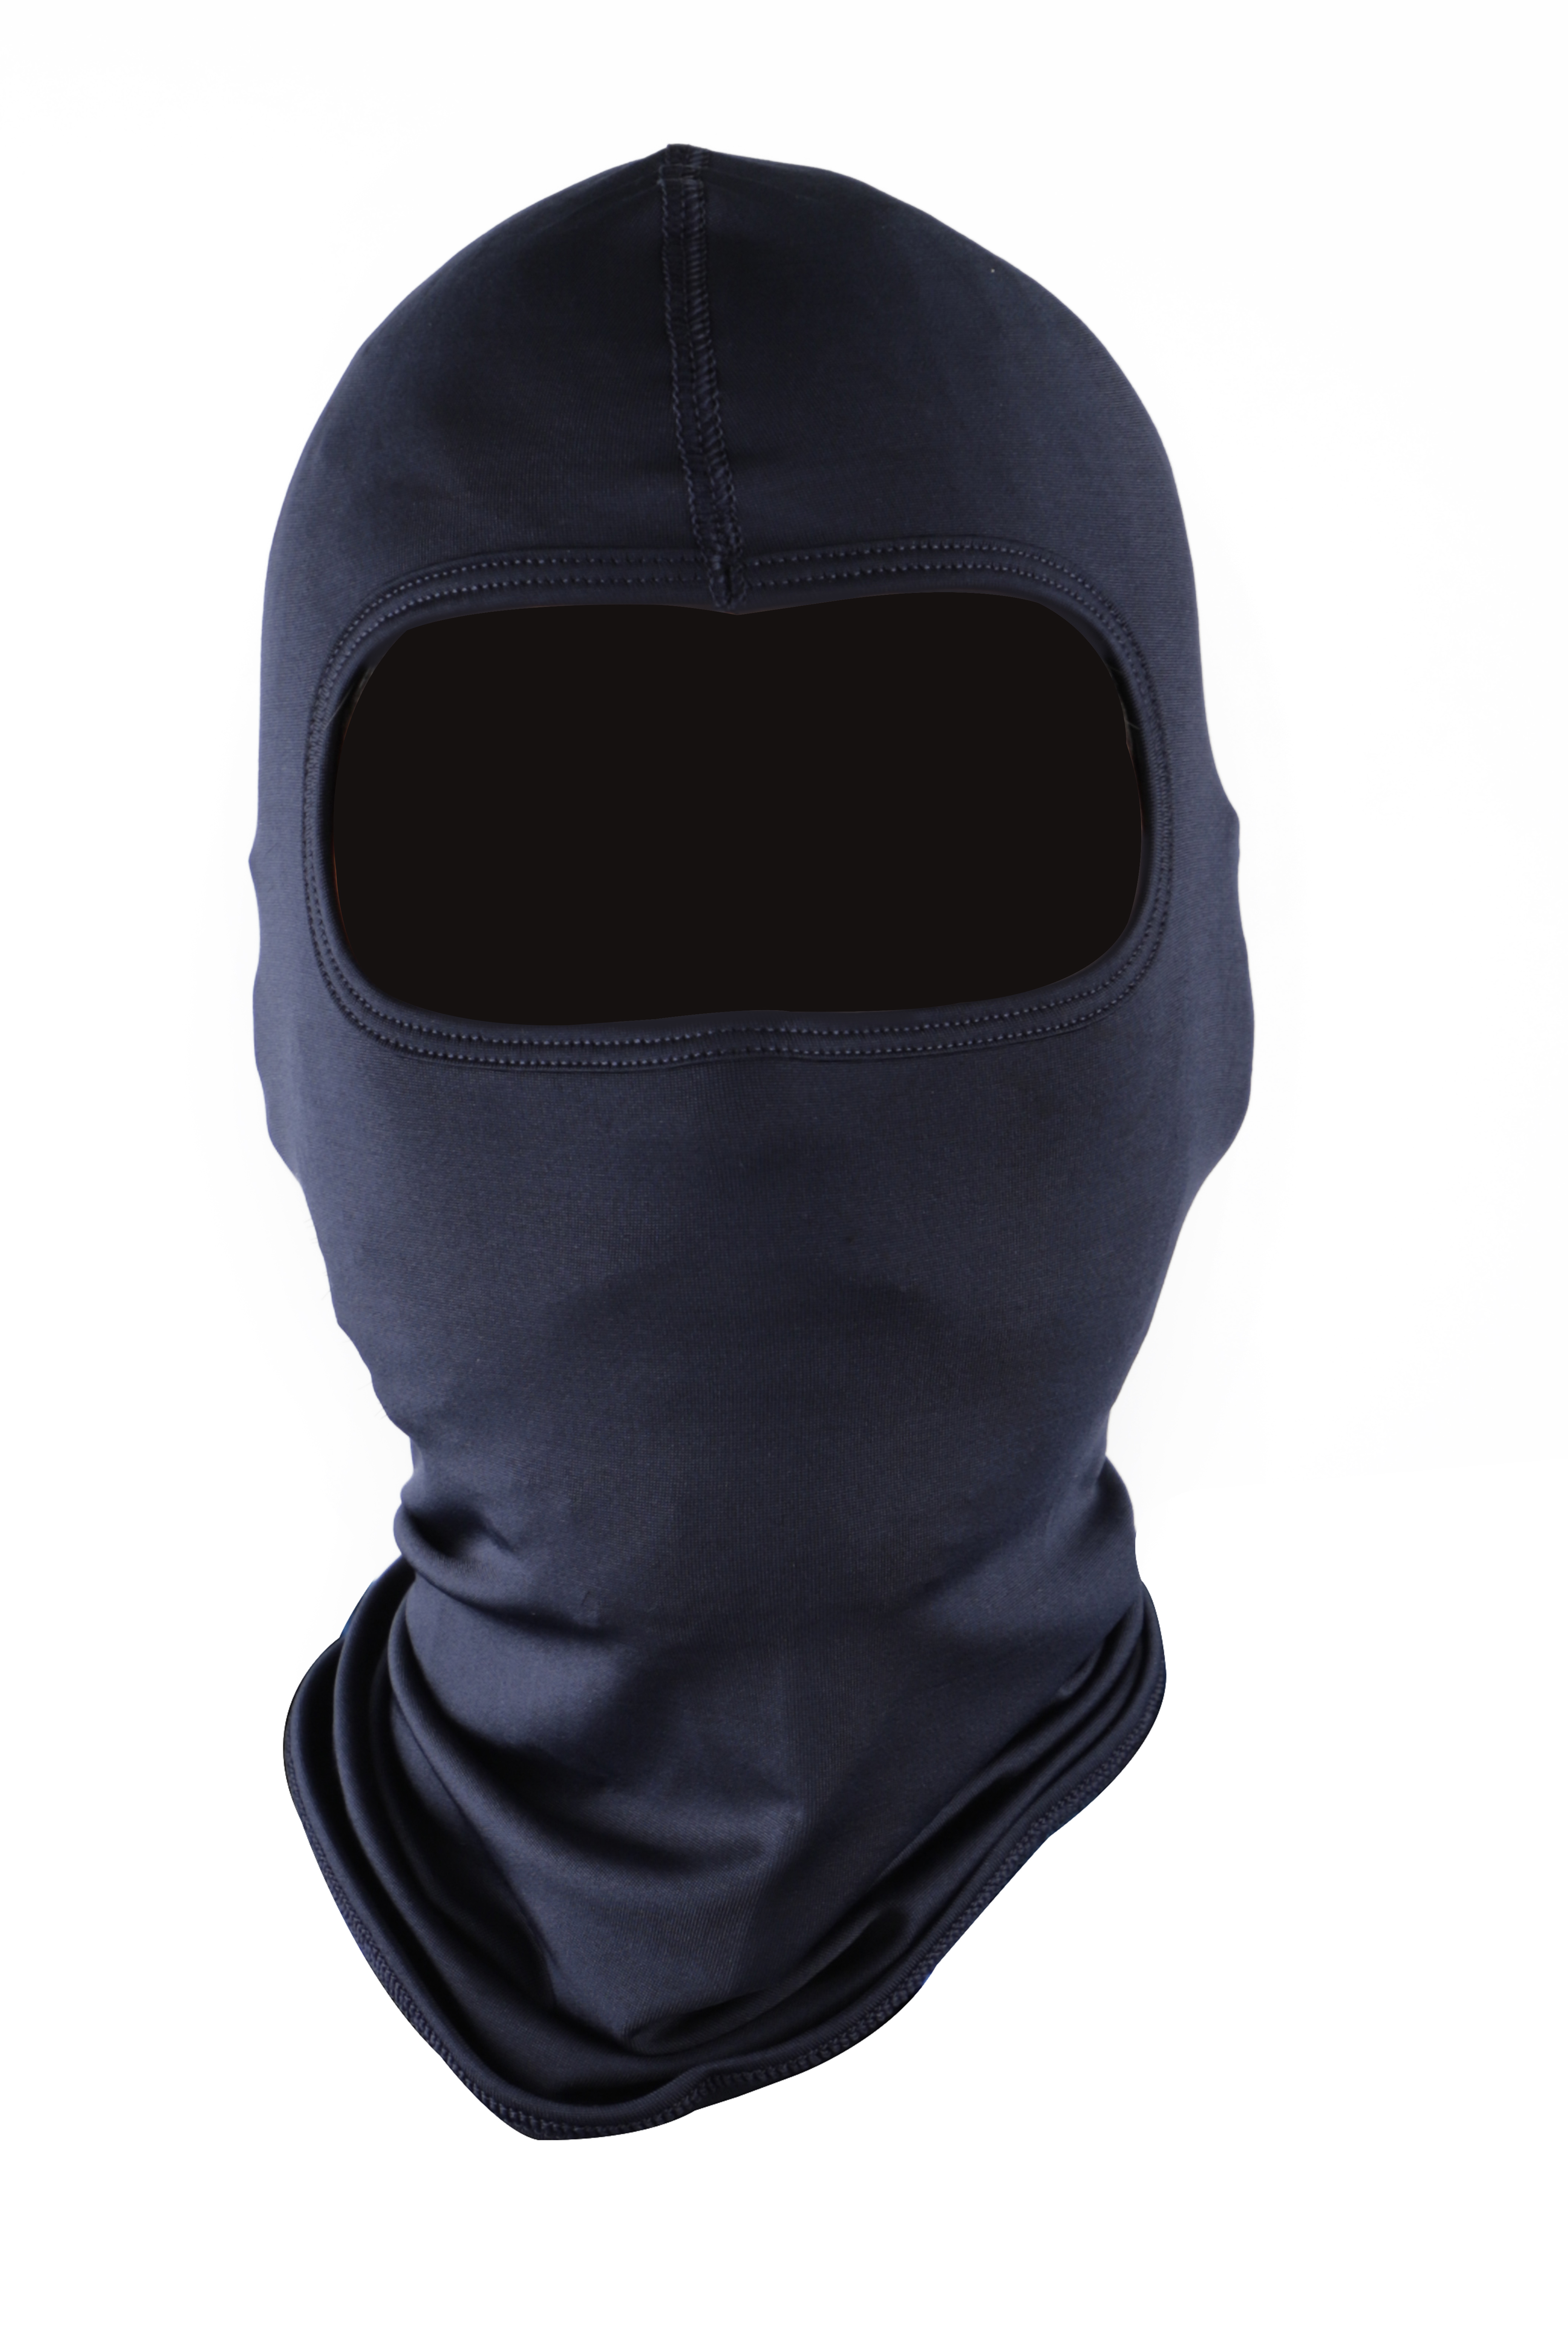 Steelbird Soft Lycra Balaclava Most Suitable For Motorcycling, Running, Sports, Head And Face Cover (Navy)